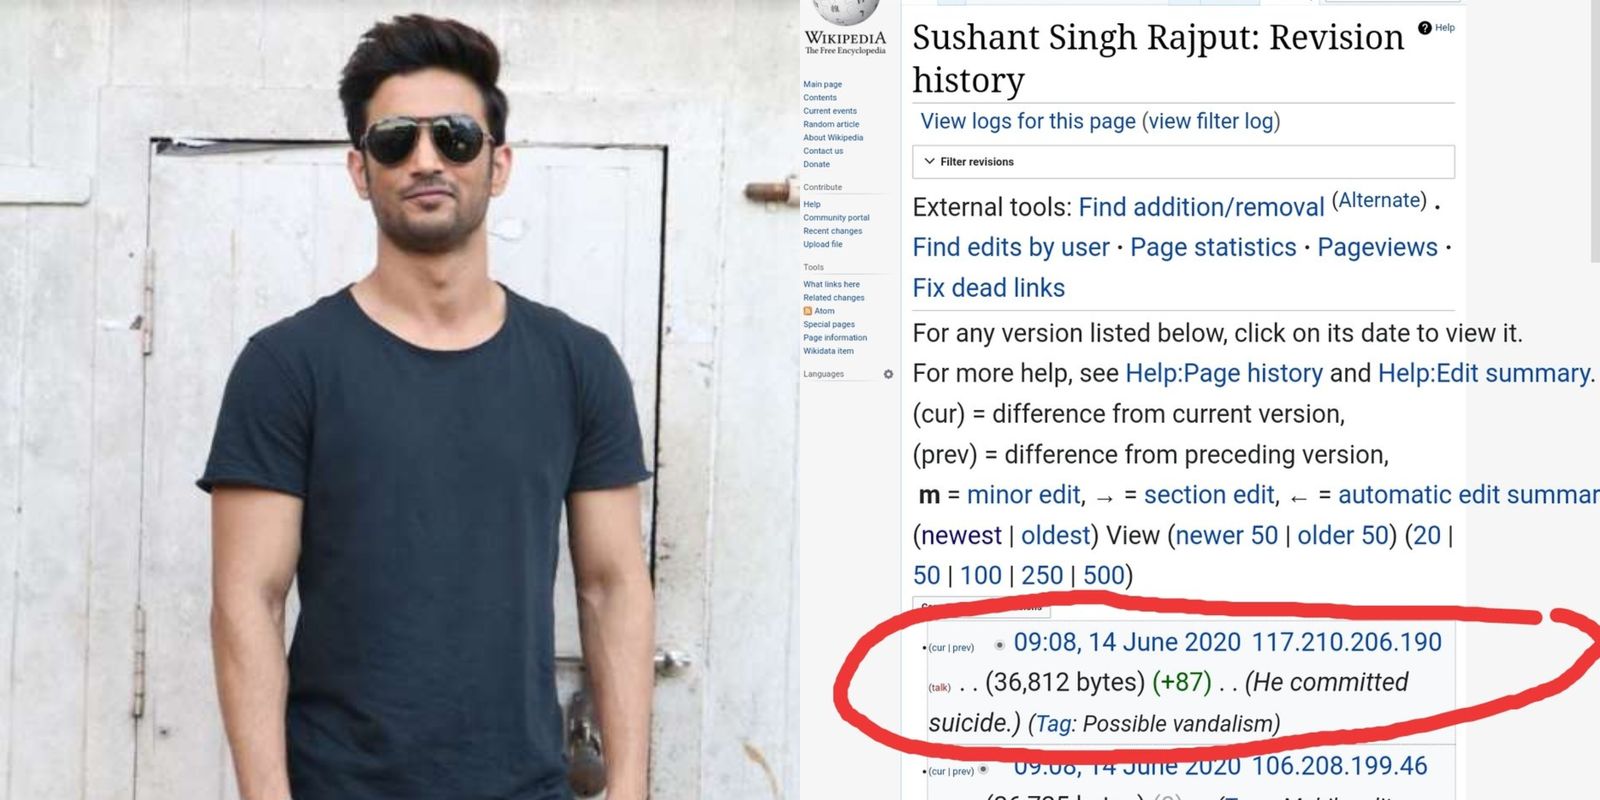 Was Sushant Singh Rajput's Wikipedia Page Updated Before His Death As Claimed By His Fans? The New Theory Goes Viral